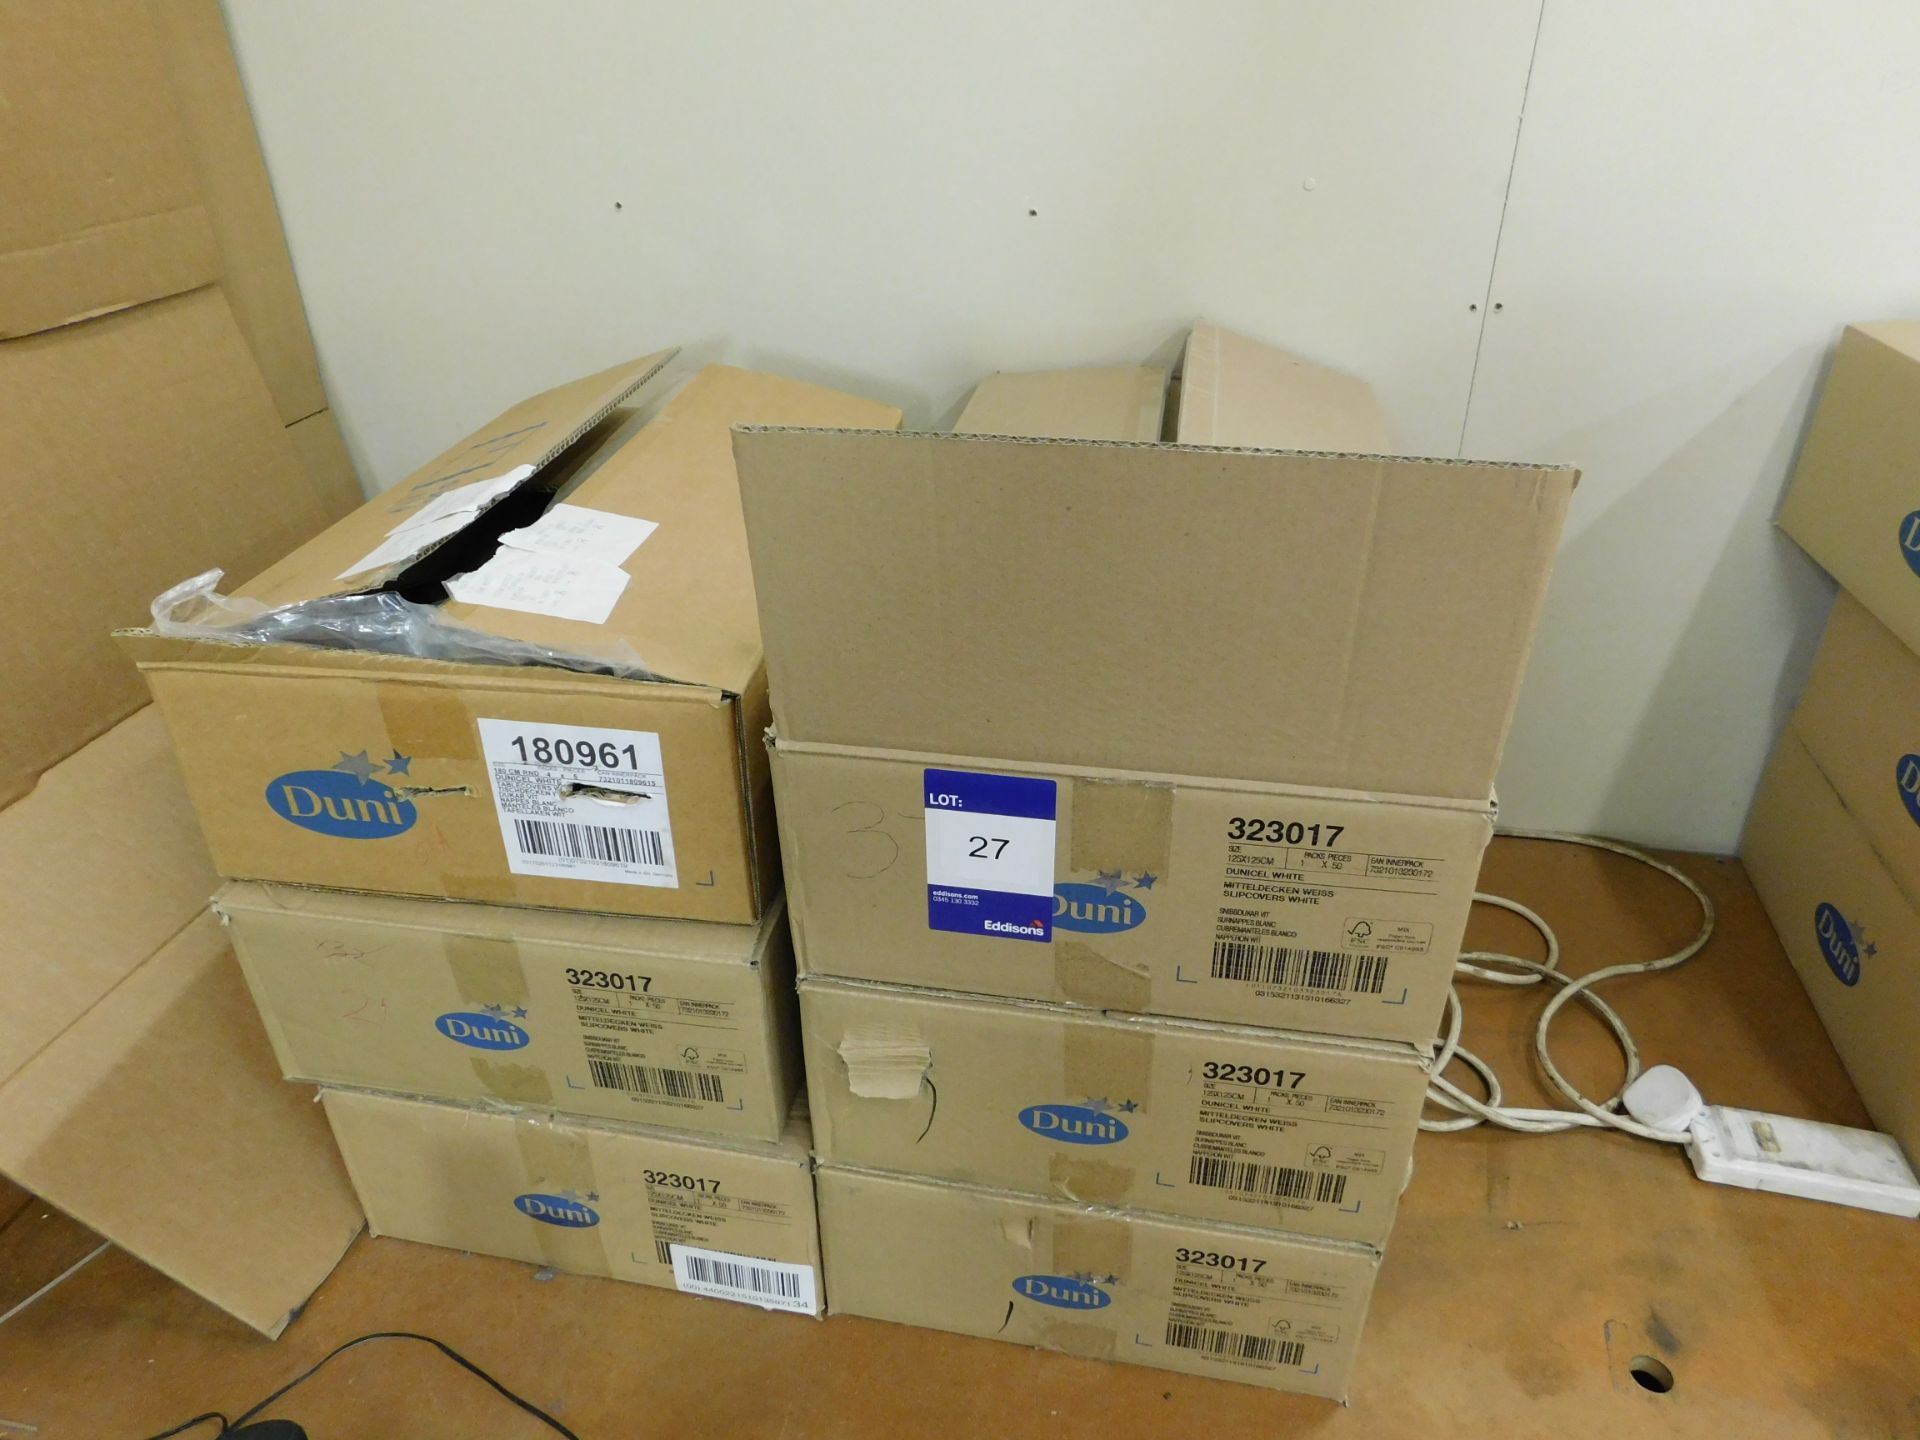 6 x Boxes of Duni covers